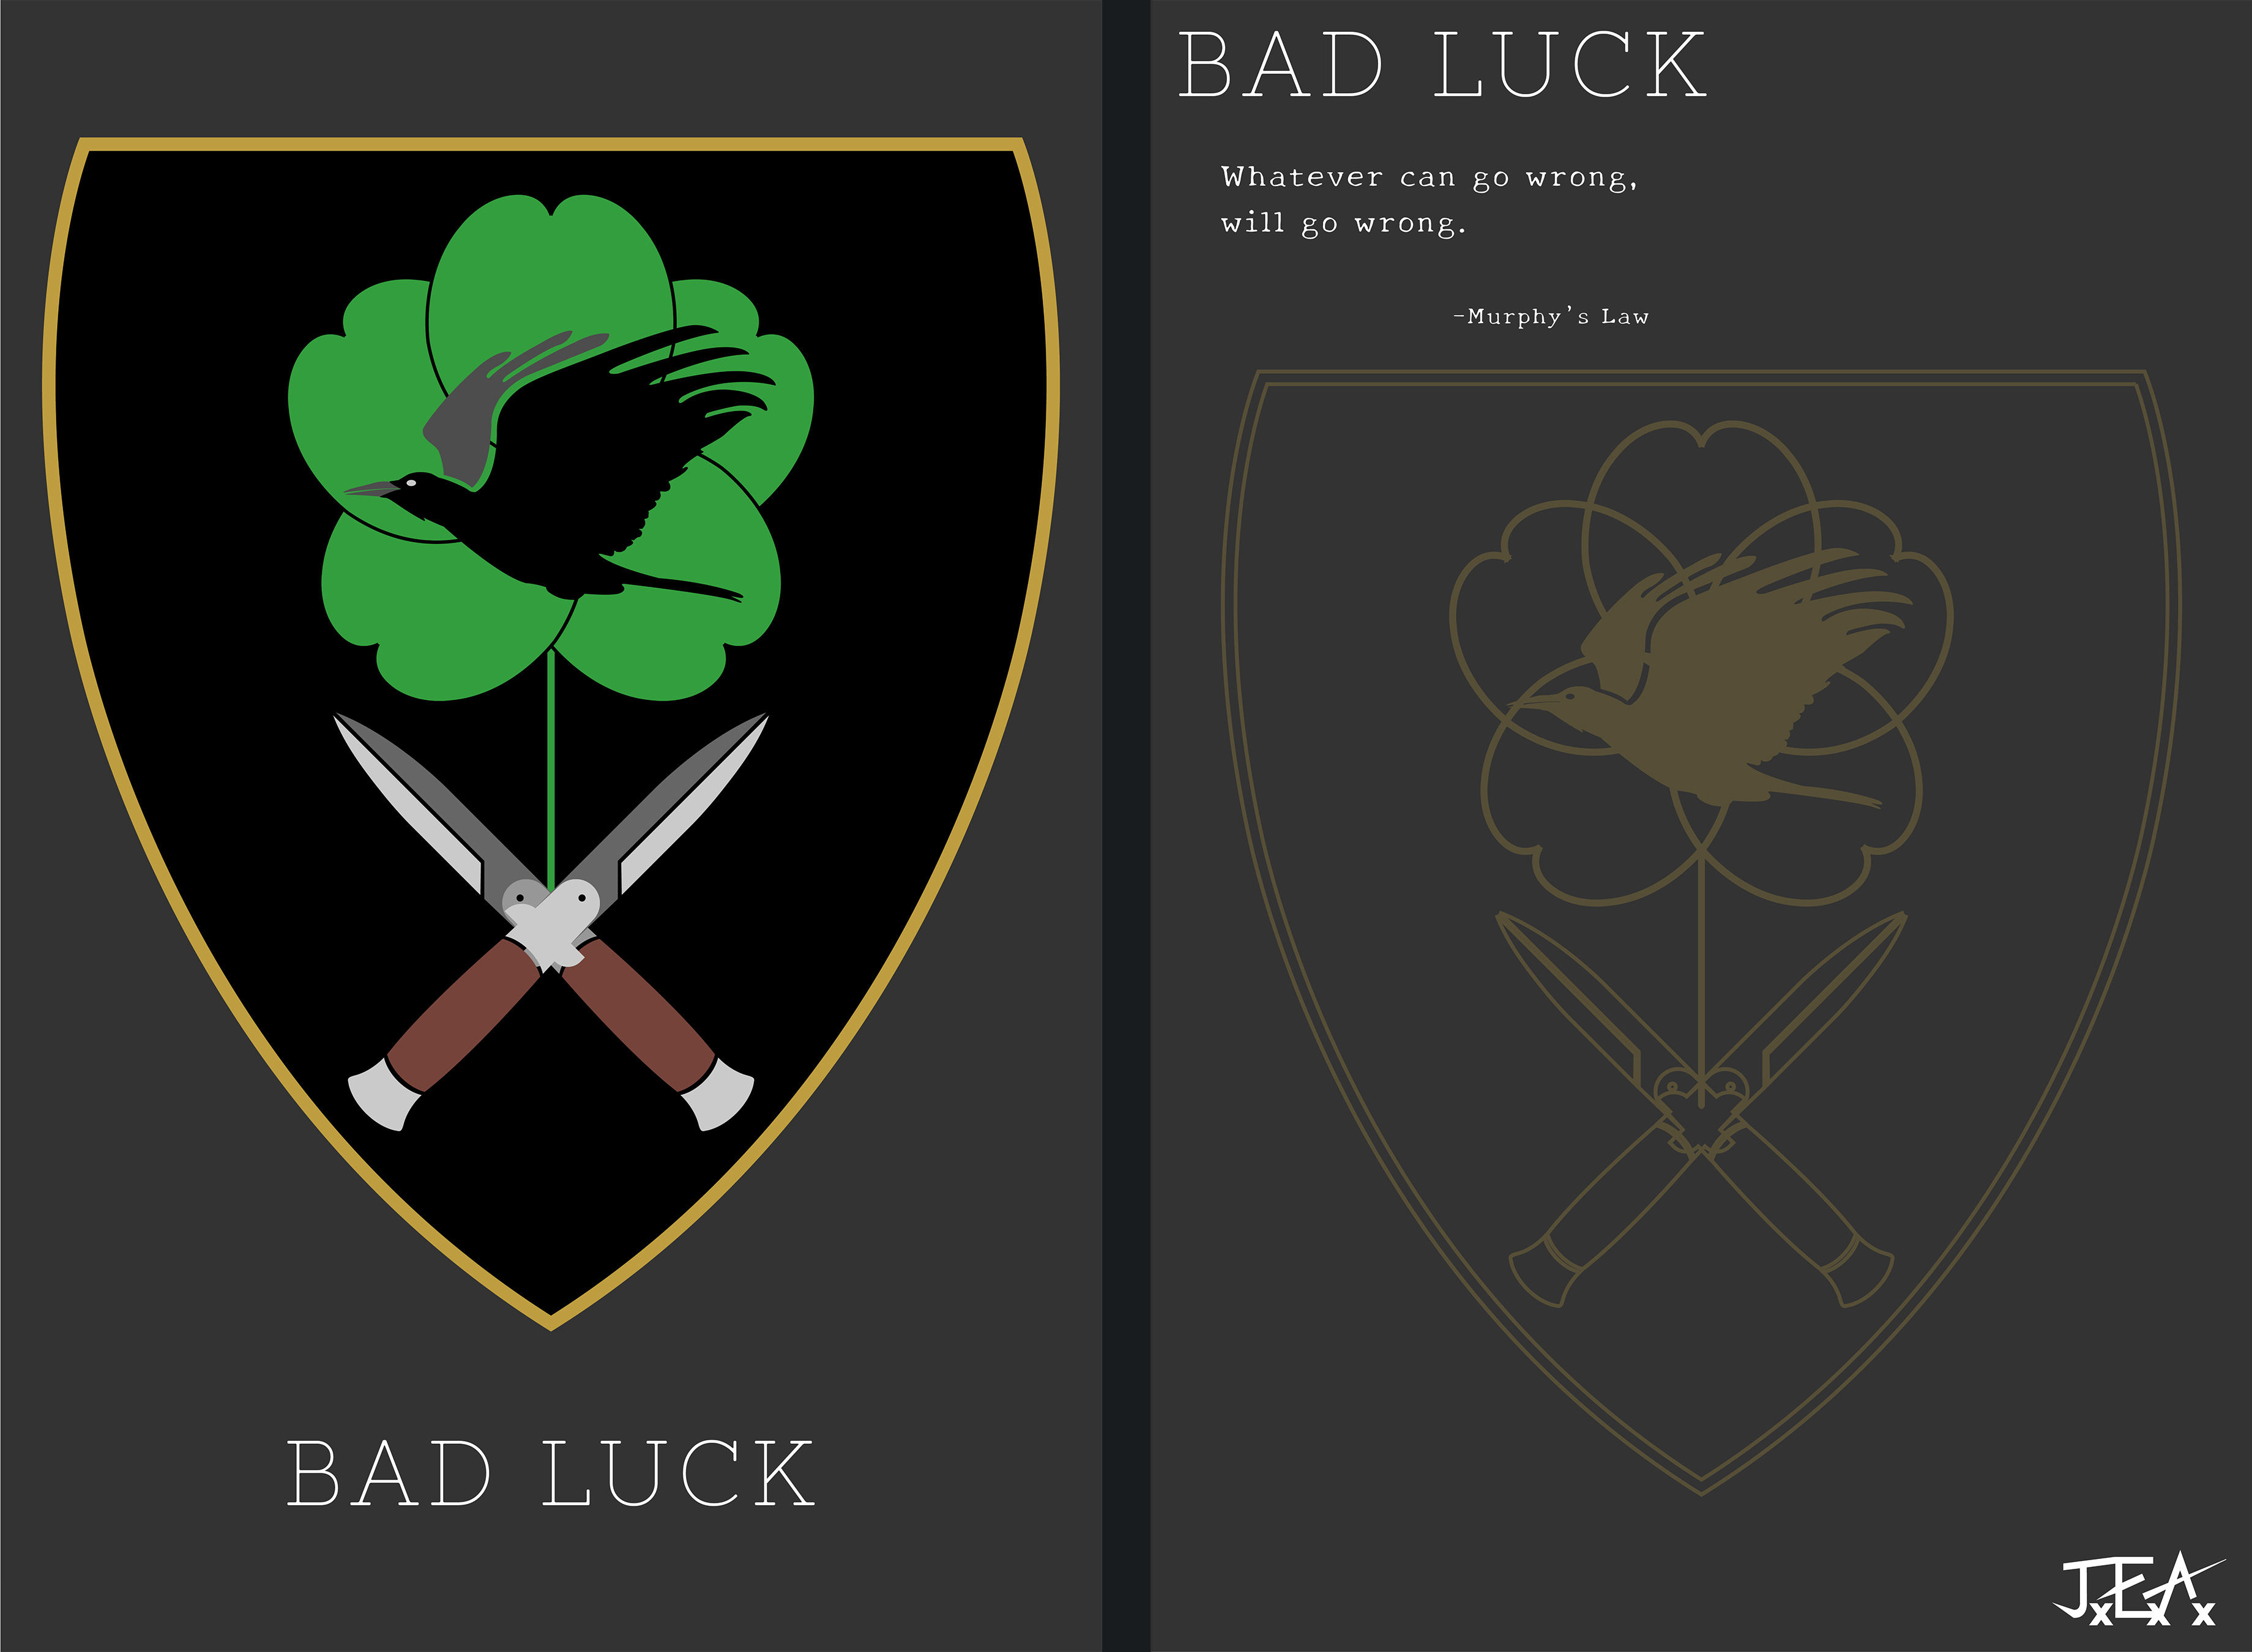 An insignia within a basic shield shape, with a 5 leaf clover background, a raven flying in the foreground, and crossed knives on the botton half of the shield shape.